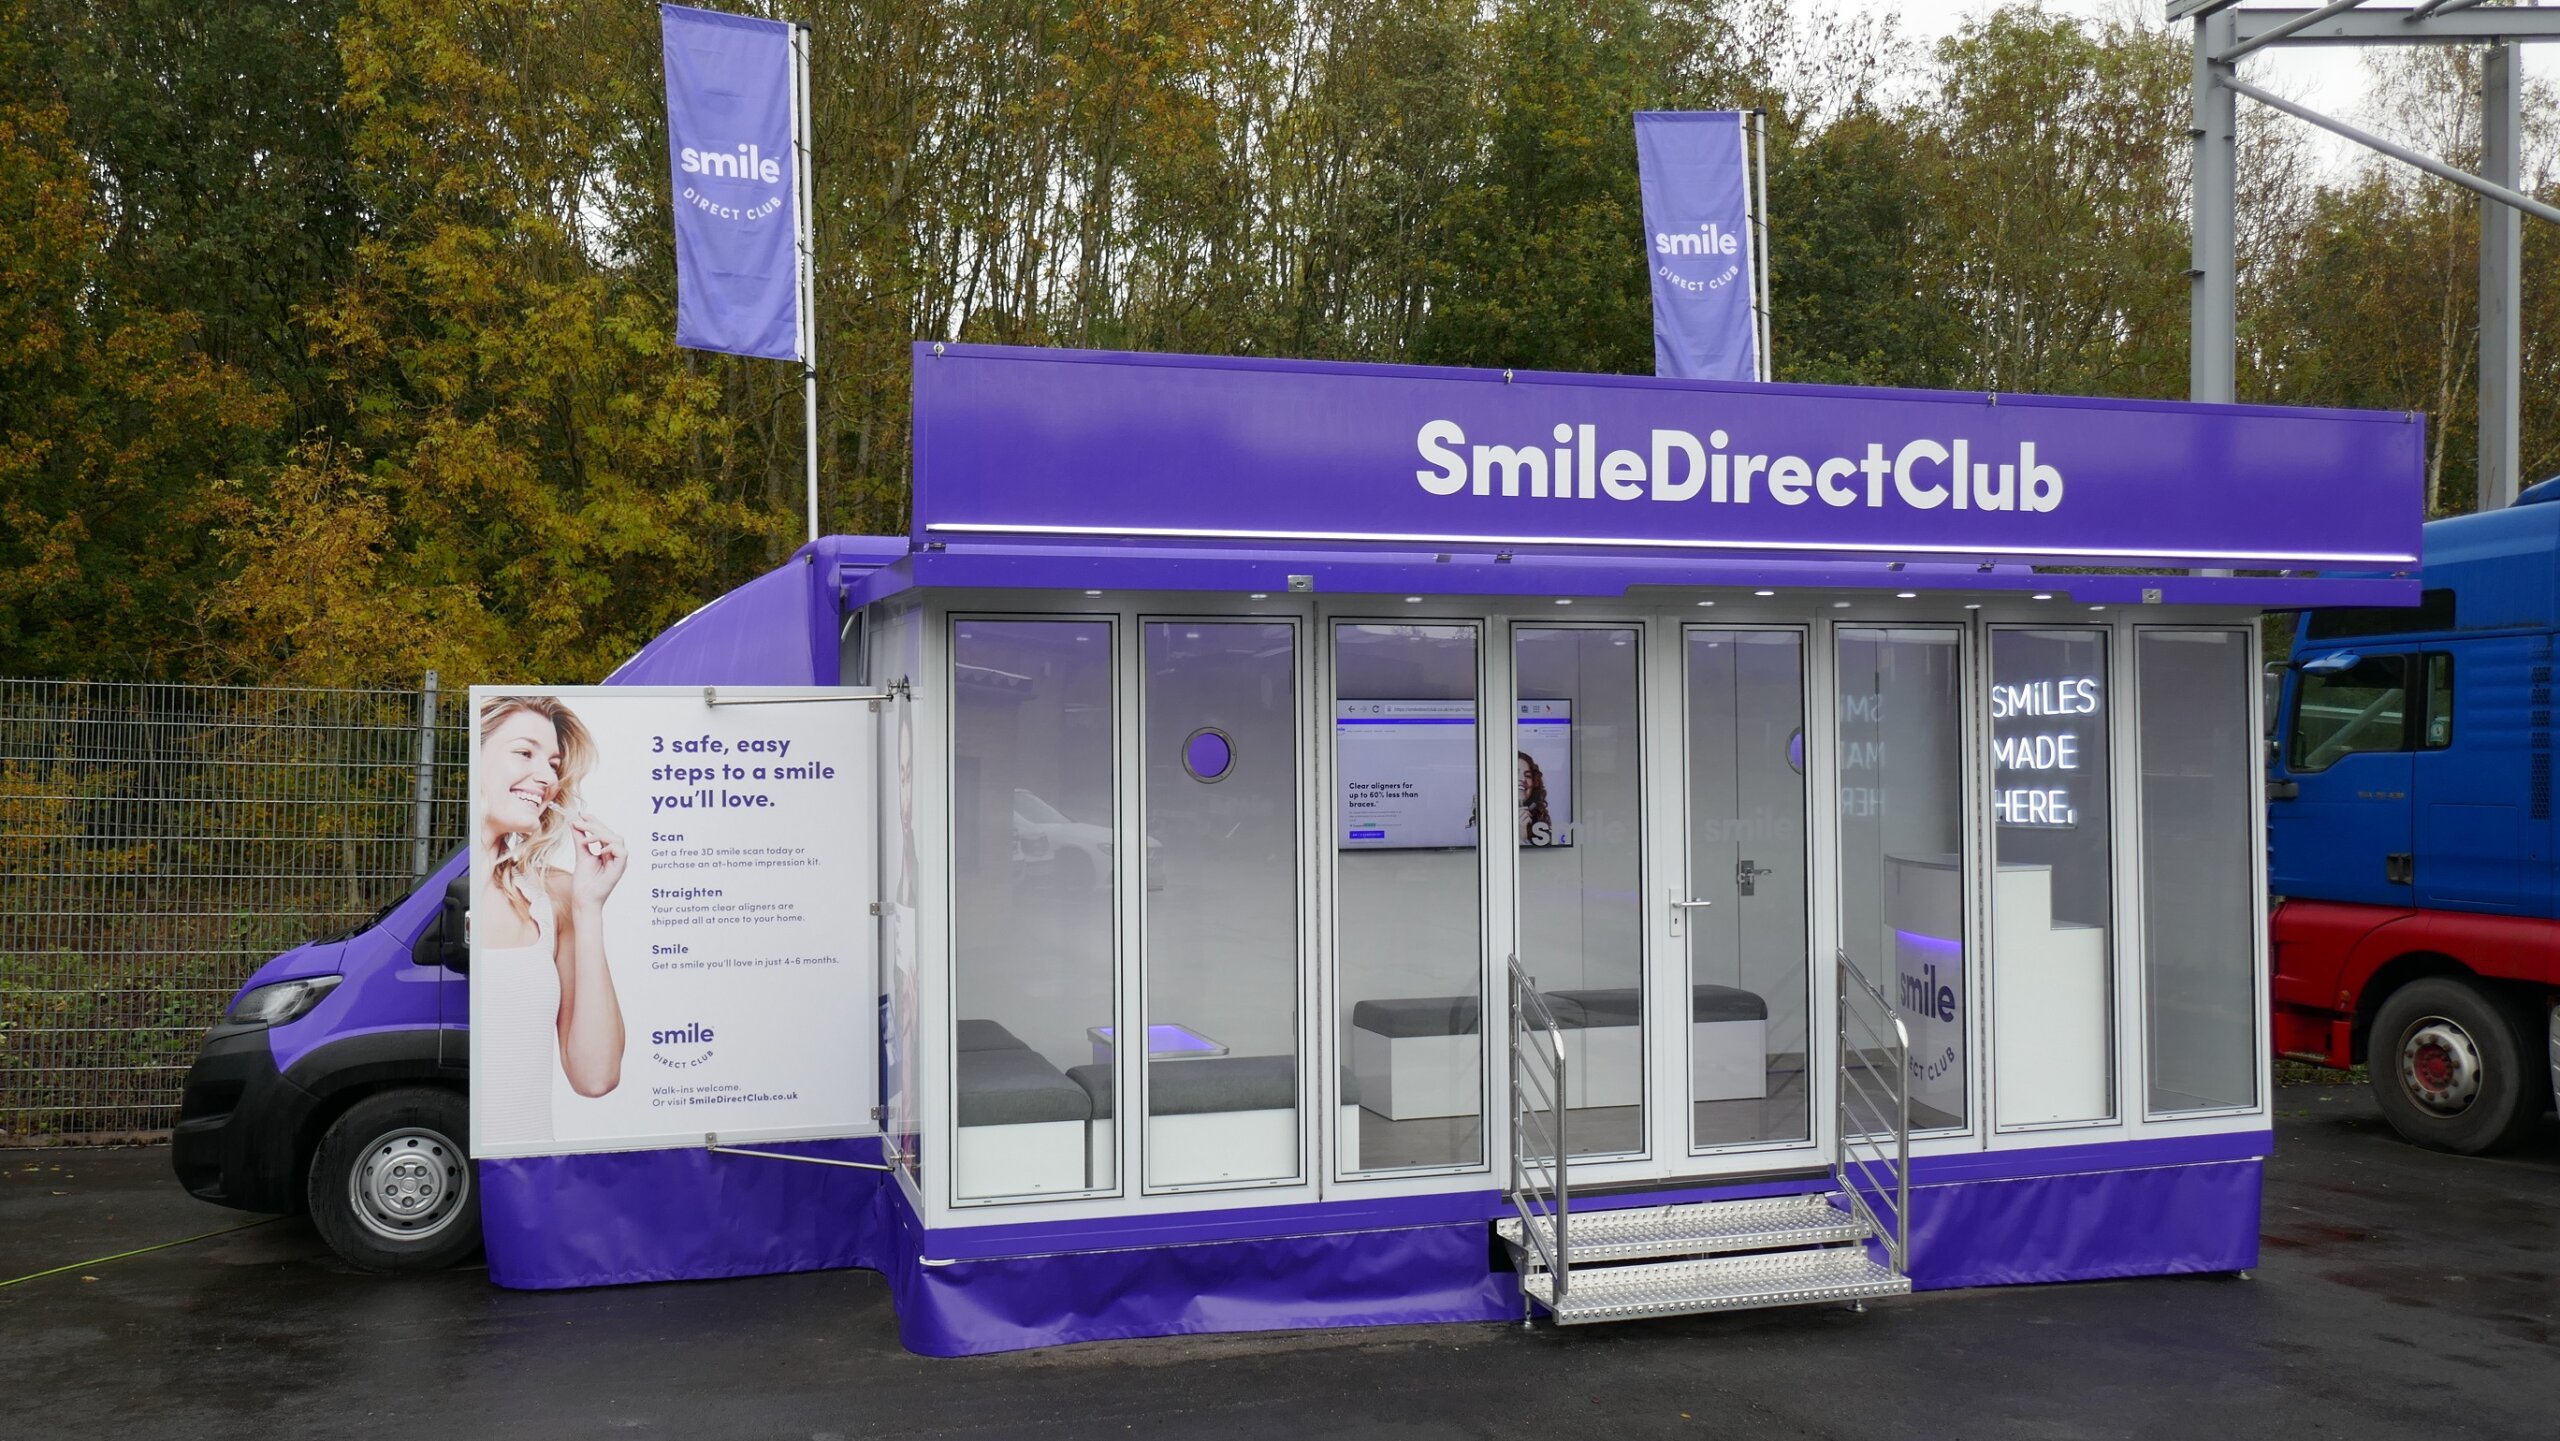 New Mobile Dental Scanning Unit for Smile Direct Club on 5,500 Kg Chassis